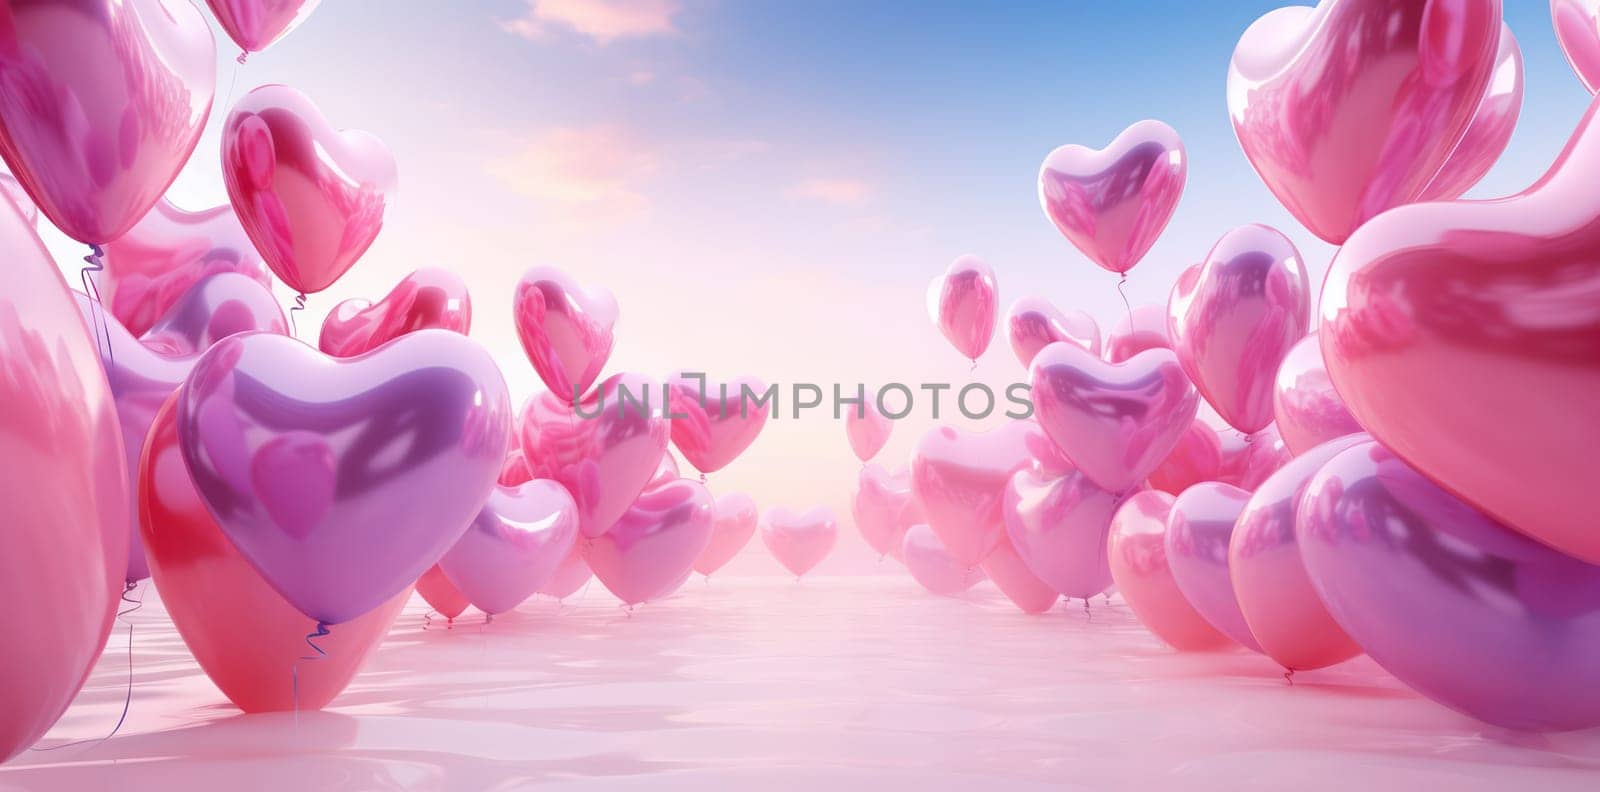 Love's Celebration: A Romantic Balloon Wedding on Pink Valentine's Day. by Vichizh